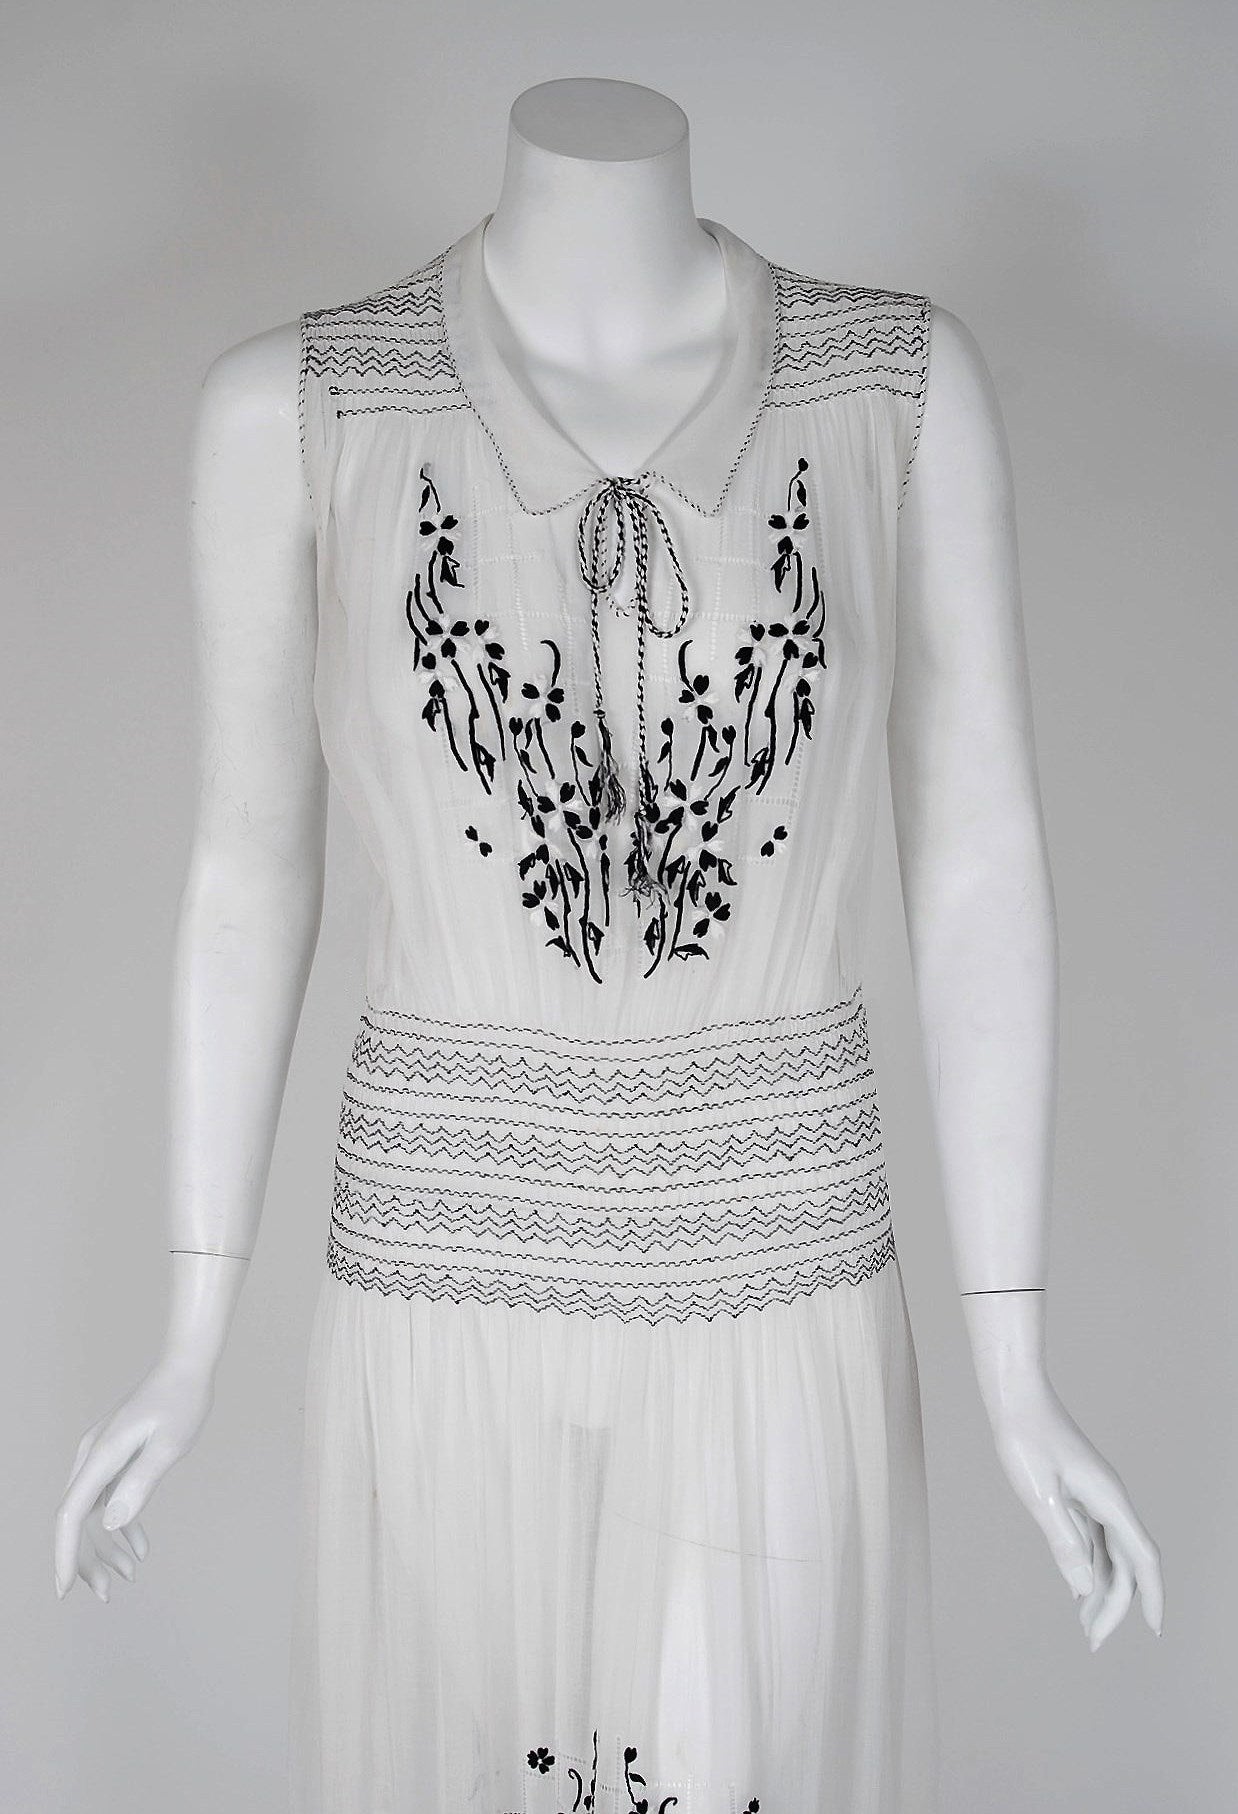 Romantic cotton dresses from the early 20th century are perennial favorites. The garment's simple unstructured style is so modern; the fine couture floral-embroidery and smocking are a treasure trove of needle art. I adore sleeveless collared bodice